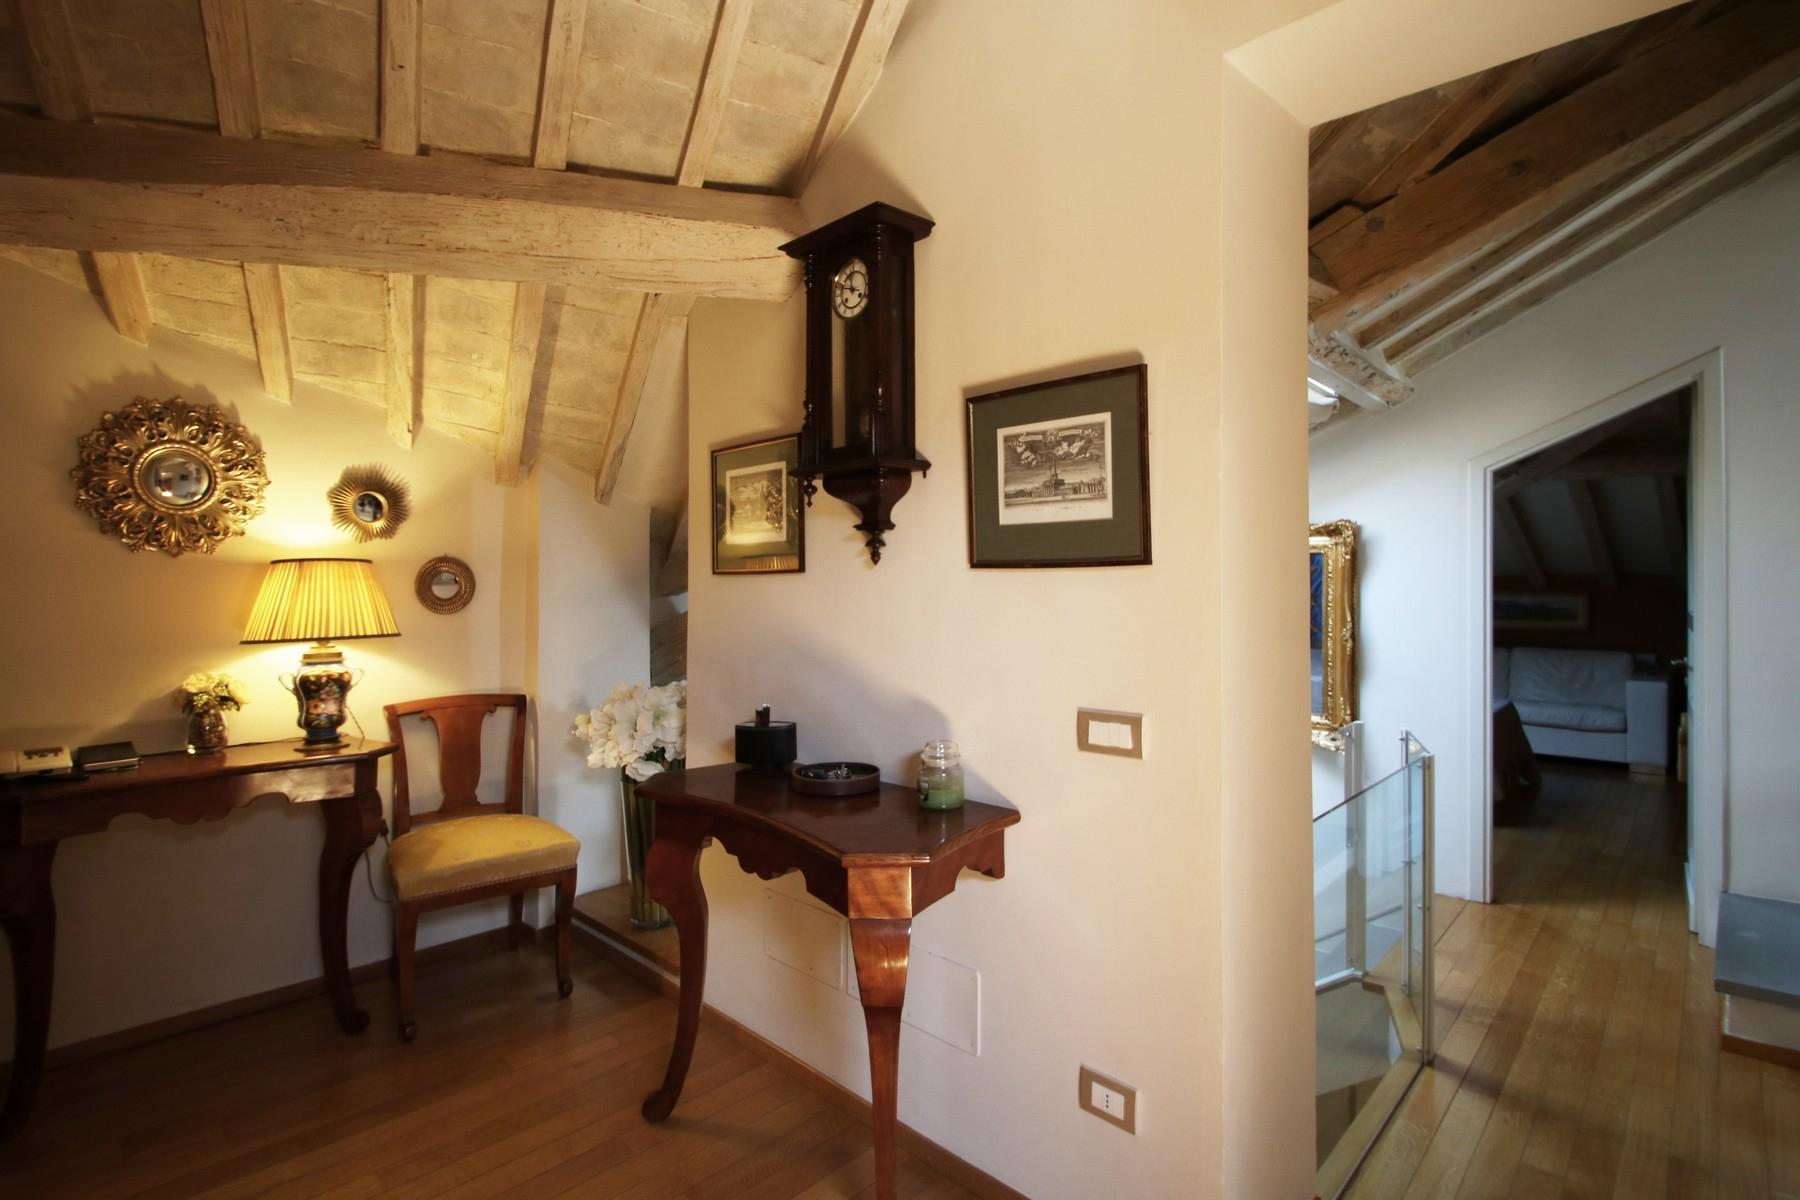 Flamboyant Top-floor Apartment with Tower in Bellosguardo, Florence - 10